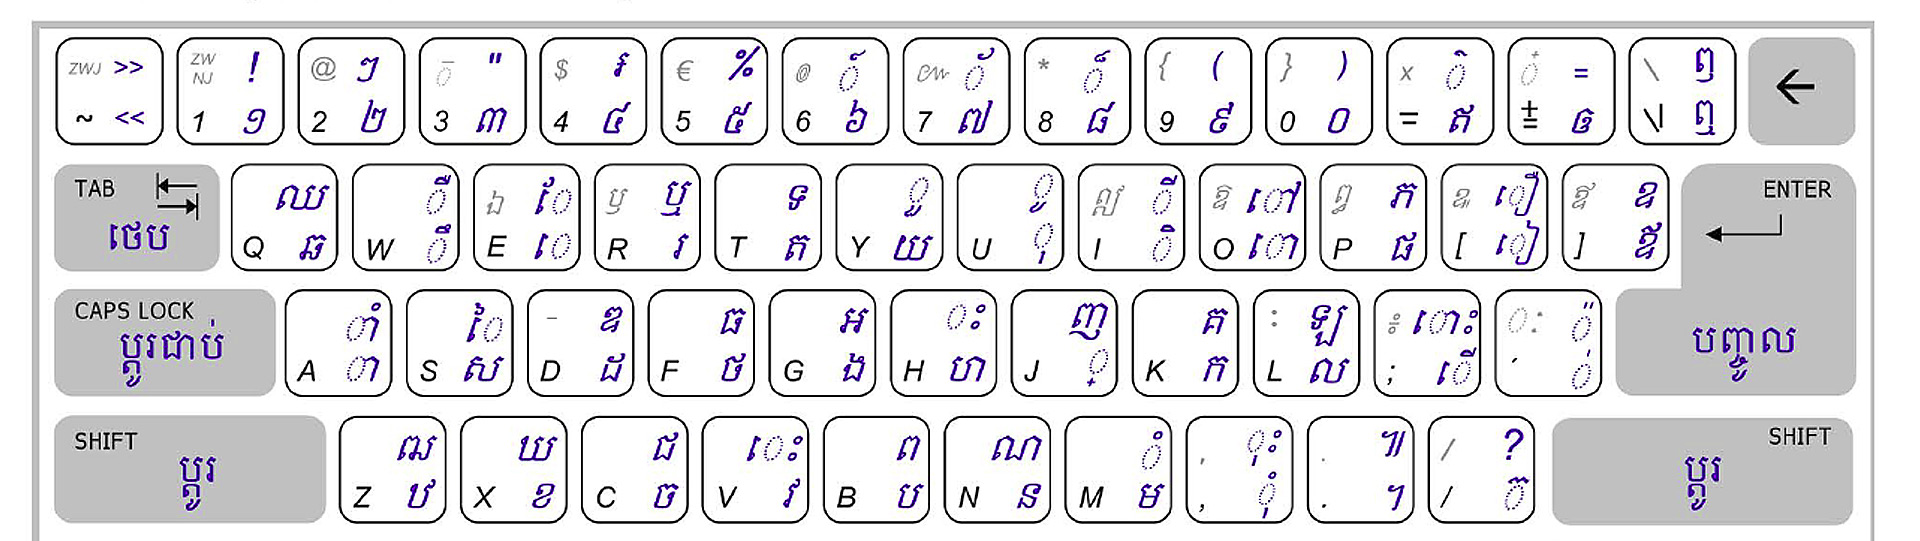 Sbbic Khmer Unicode Keyboard 1.0 64-Bit And 32-Bit Windows And Mac Os X -  Society For Better Books In Cambodia